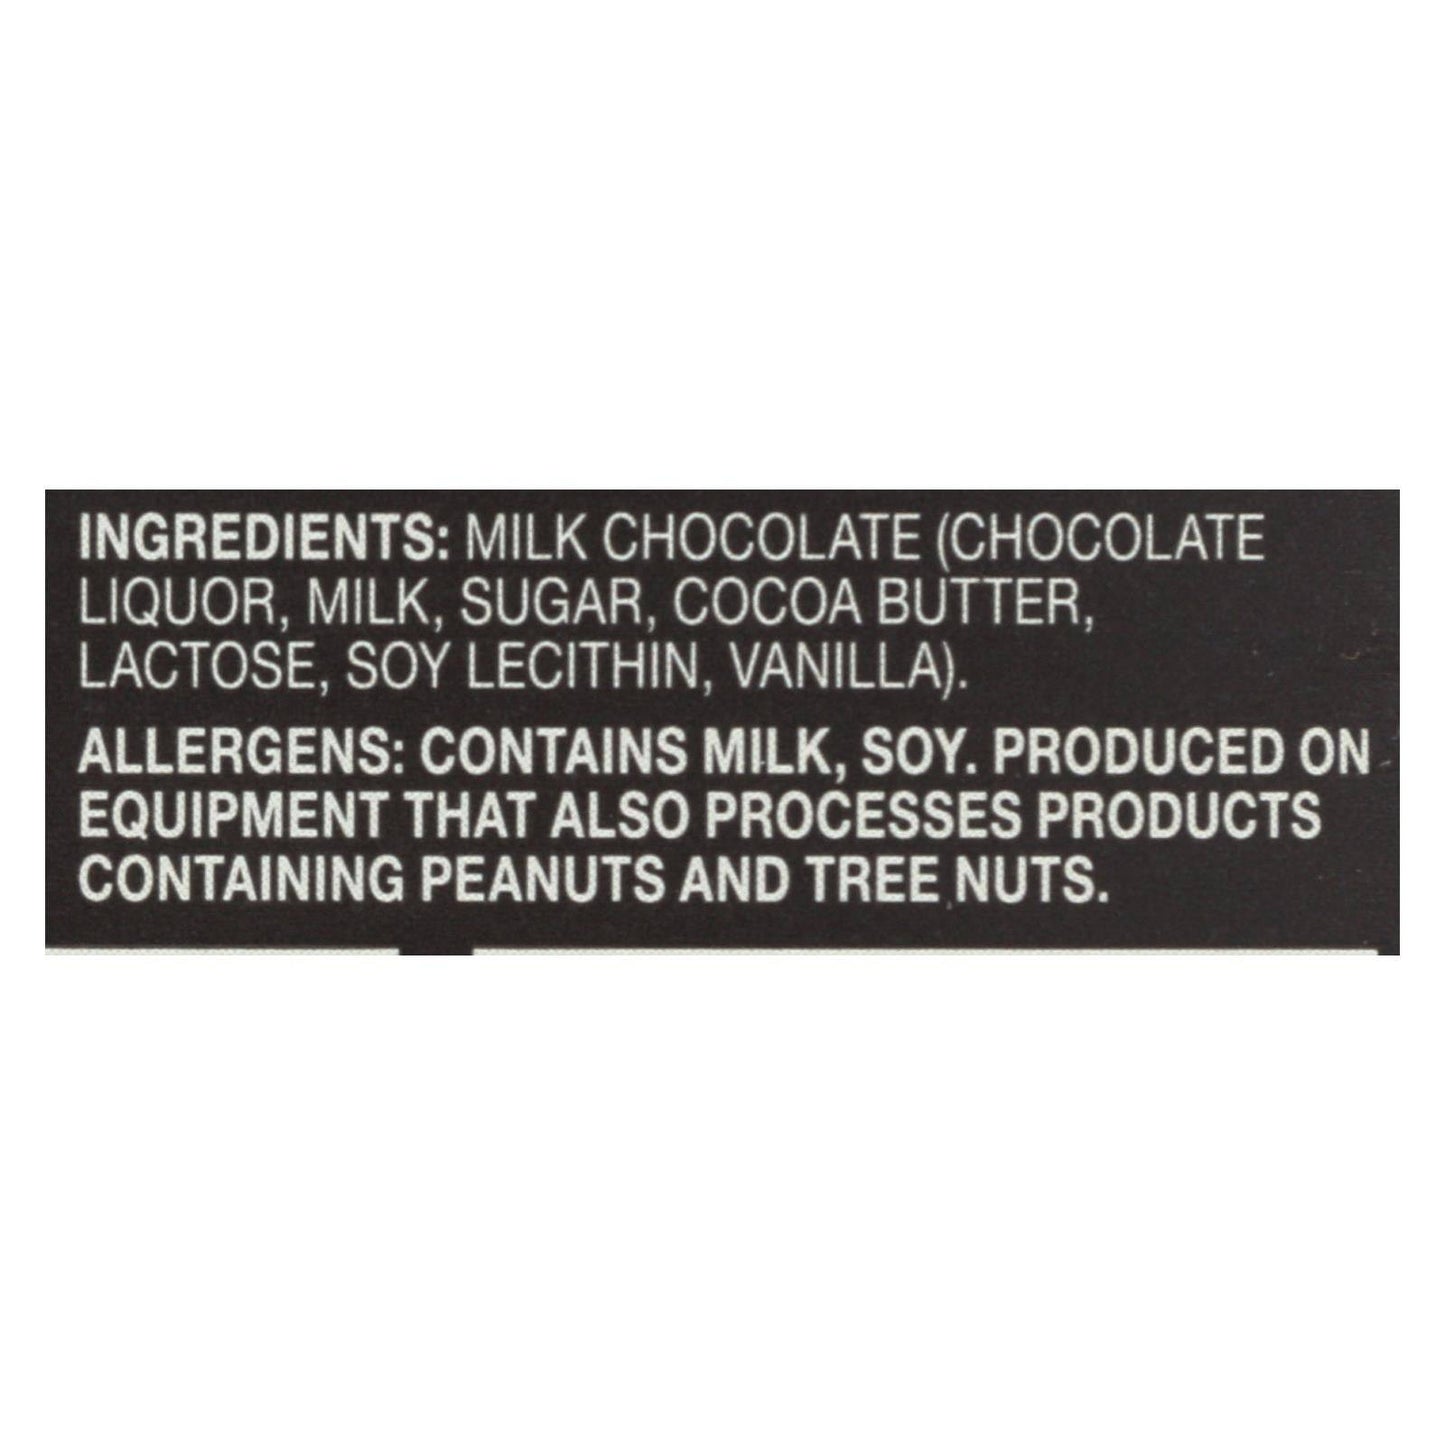 Buy Endangered Species Natural Chocolate Bars - Milk Chocolate - 48 Percent Cocoa - 3 Oz Bars - Case Of 12  at OnlyNaturals.us